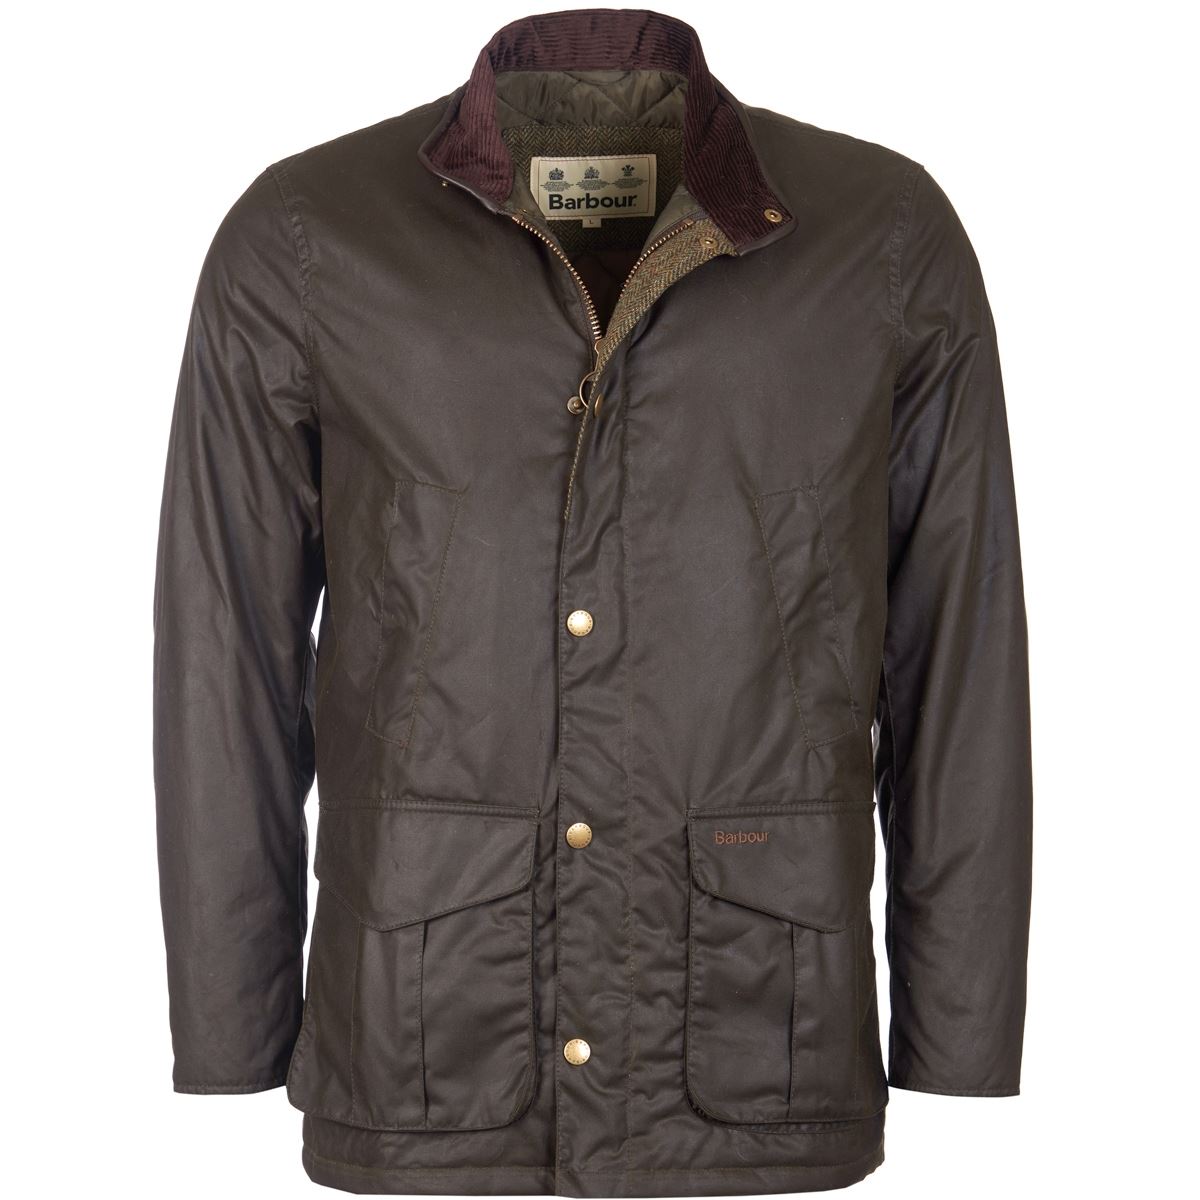 Is the best Barbour jacket waxed?